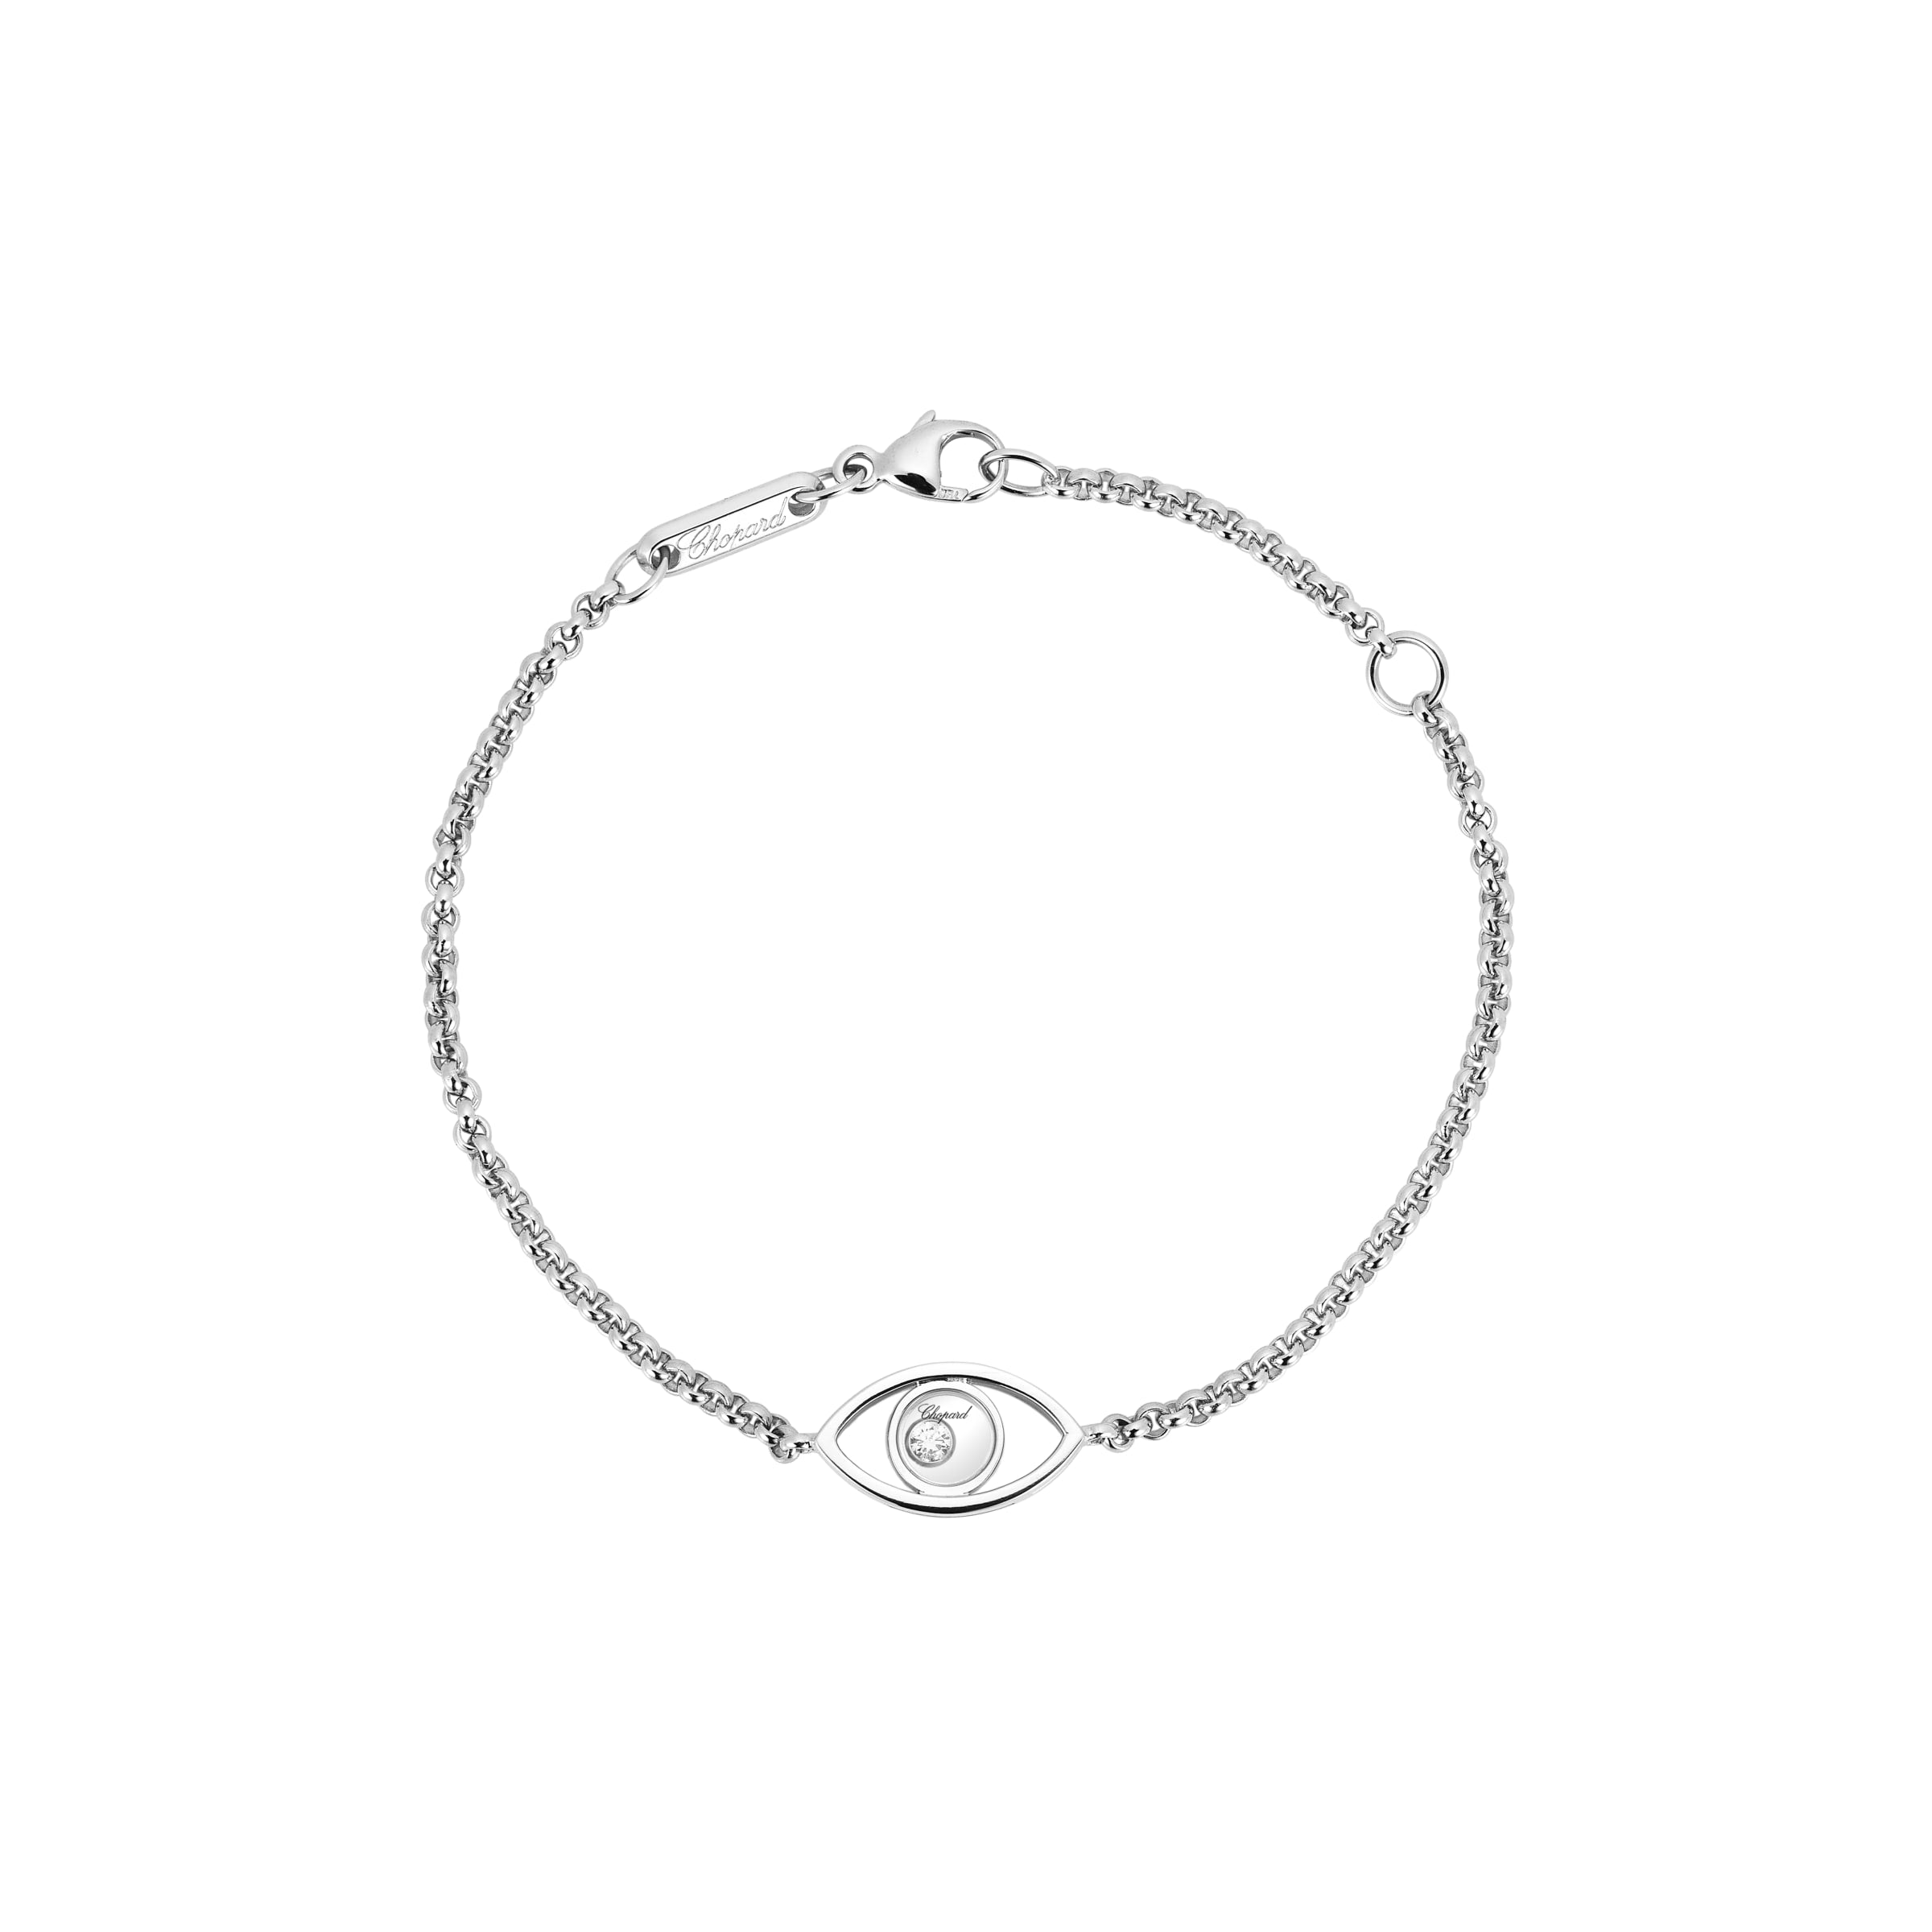 Bracelet thread Cercle diamonds and silver  Vanessa Tugendhaft joaillerie